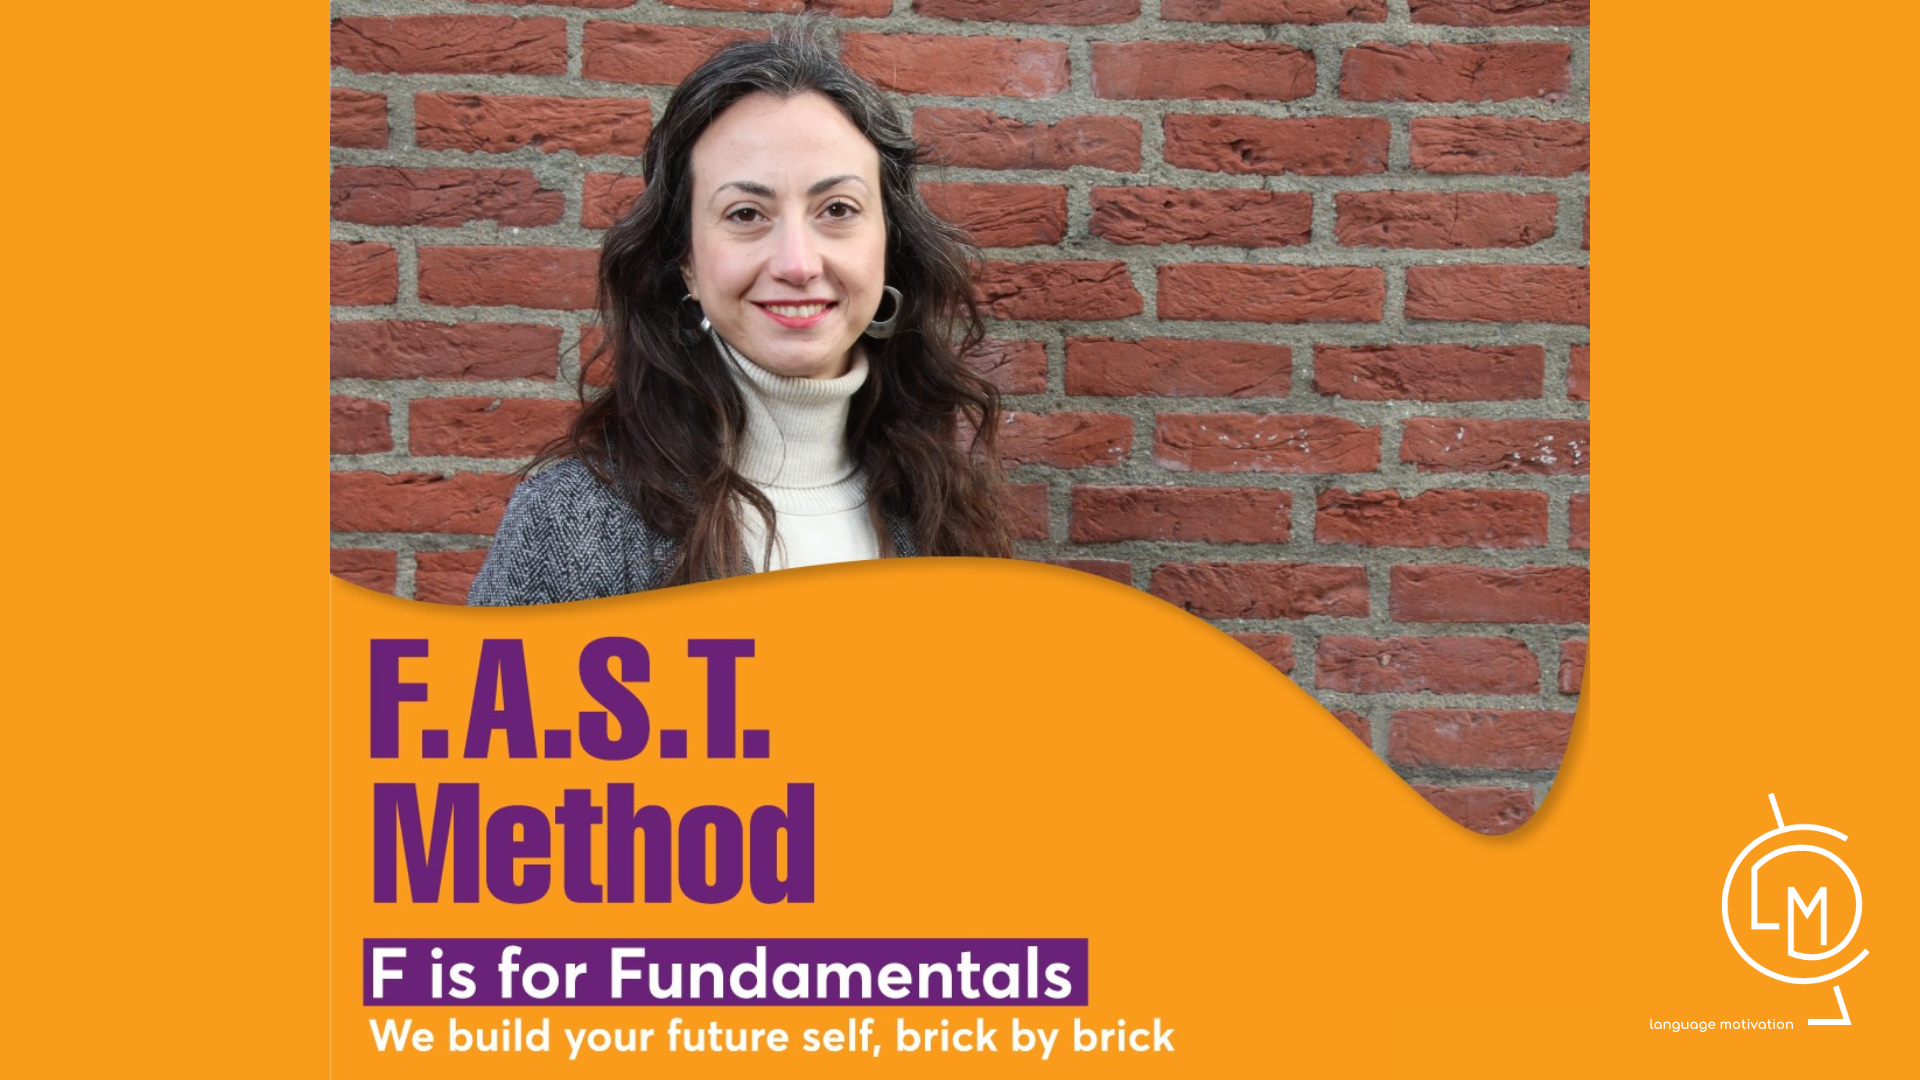 The F.A.S.T. method is based on the Fundamentals